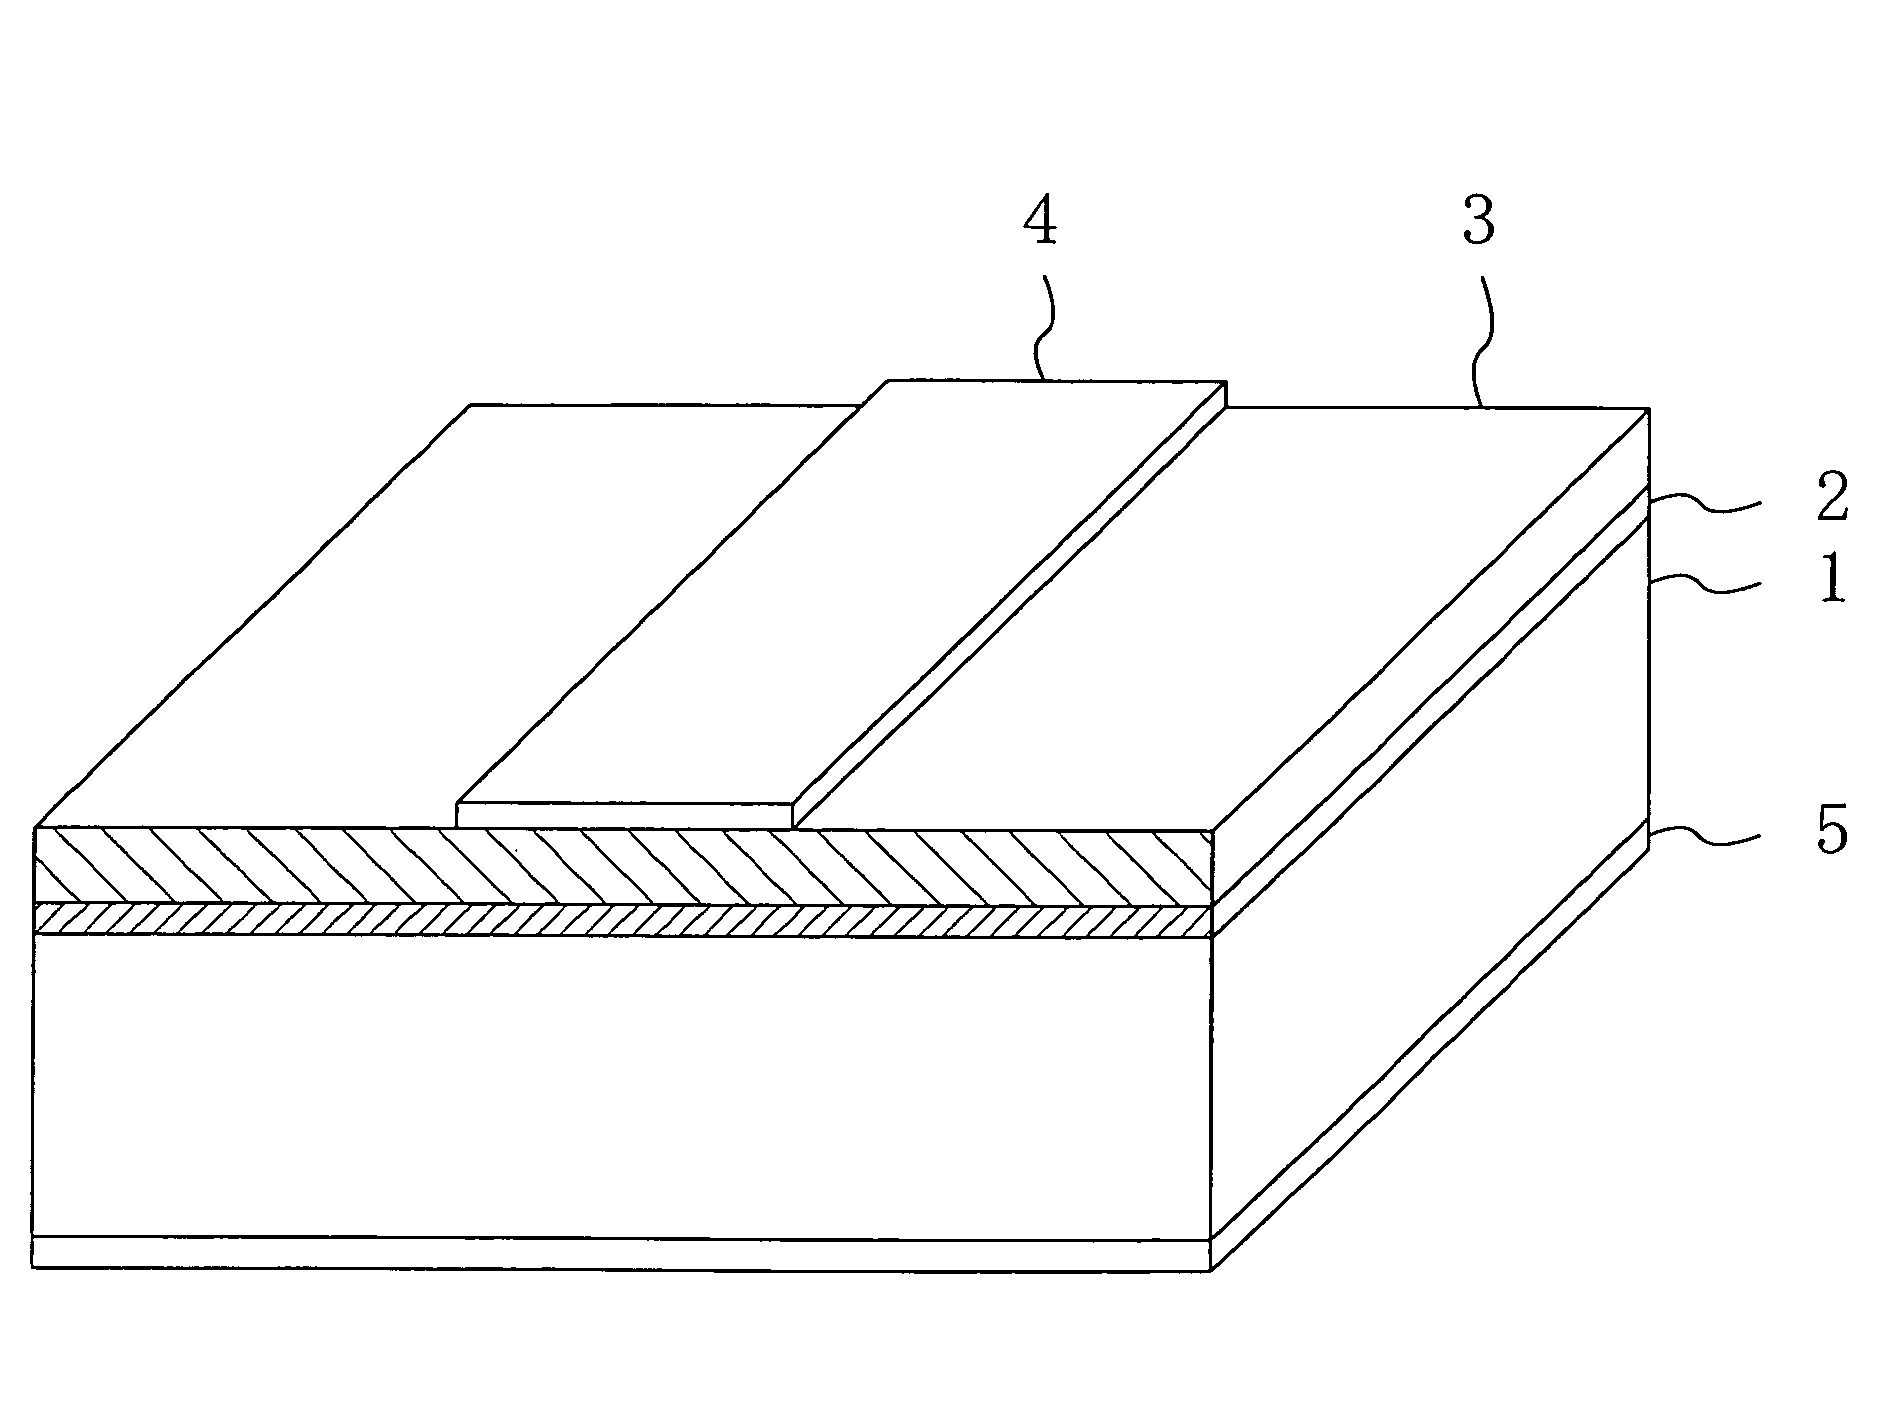 Microwave transmission line having dielectric film layers providing negative space charge effects